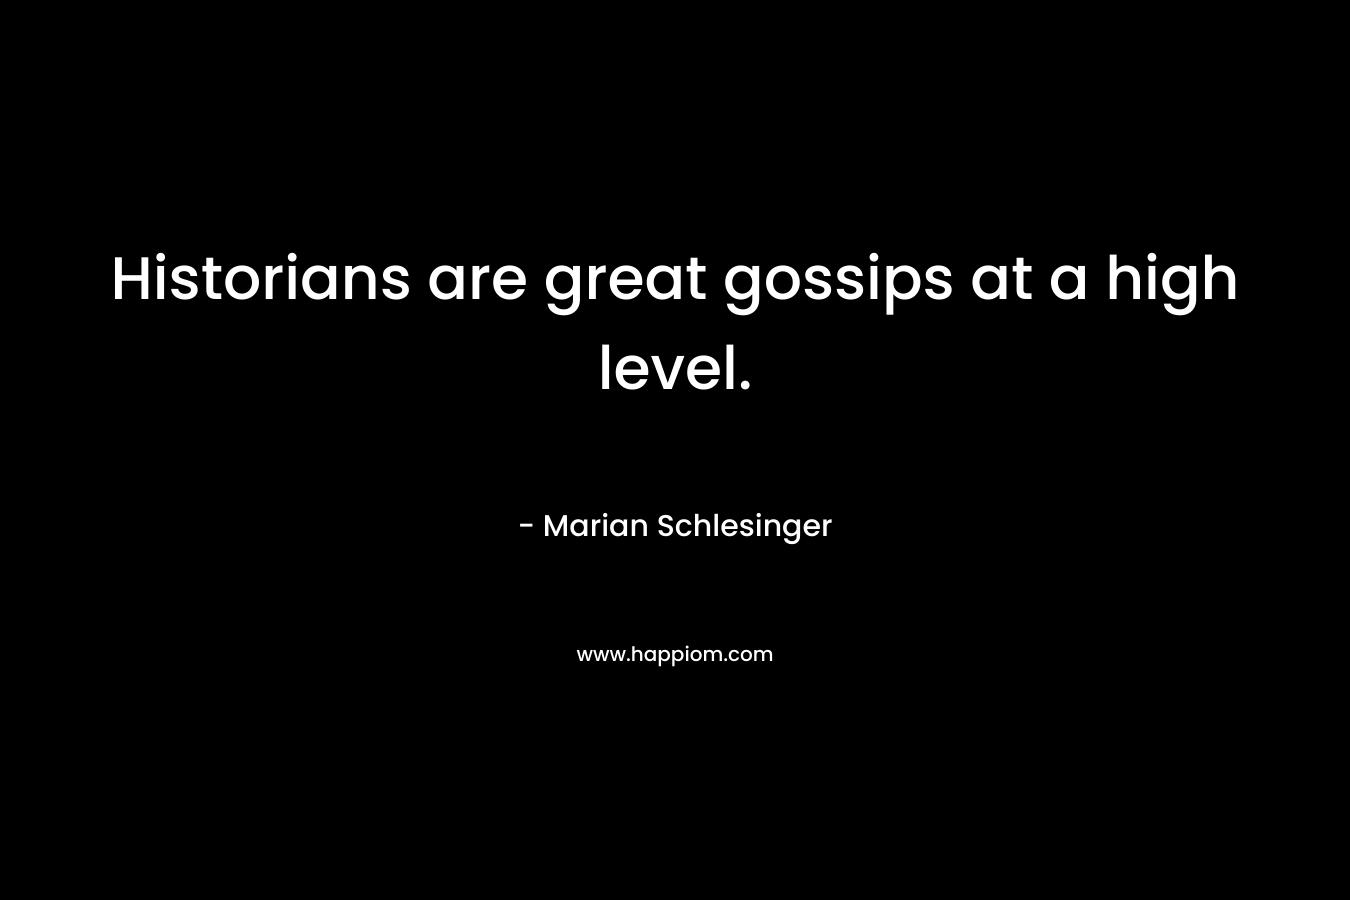 Historians are great gossips at a high level. – Marian Schlesinger